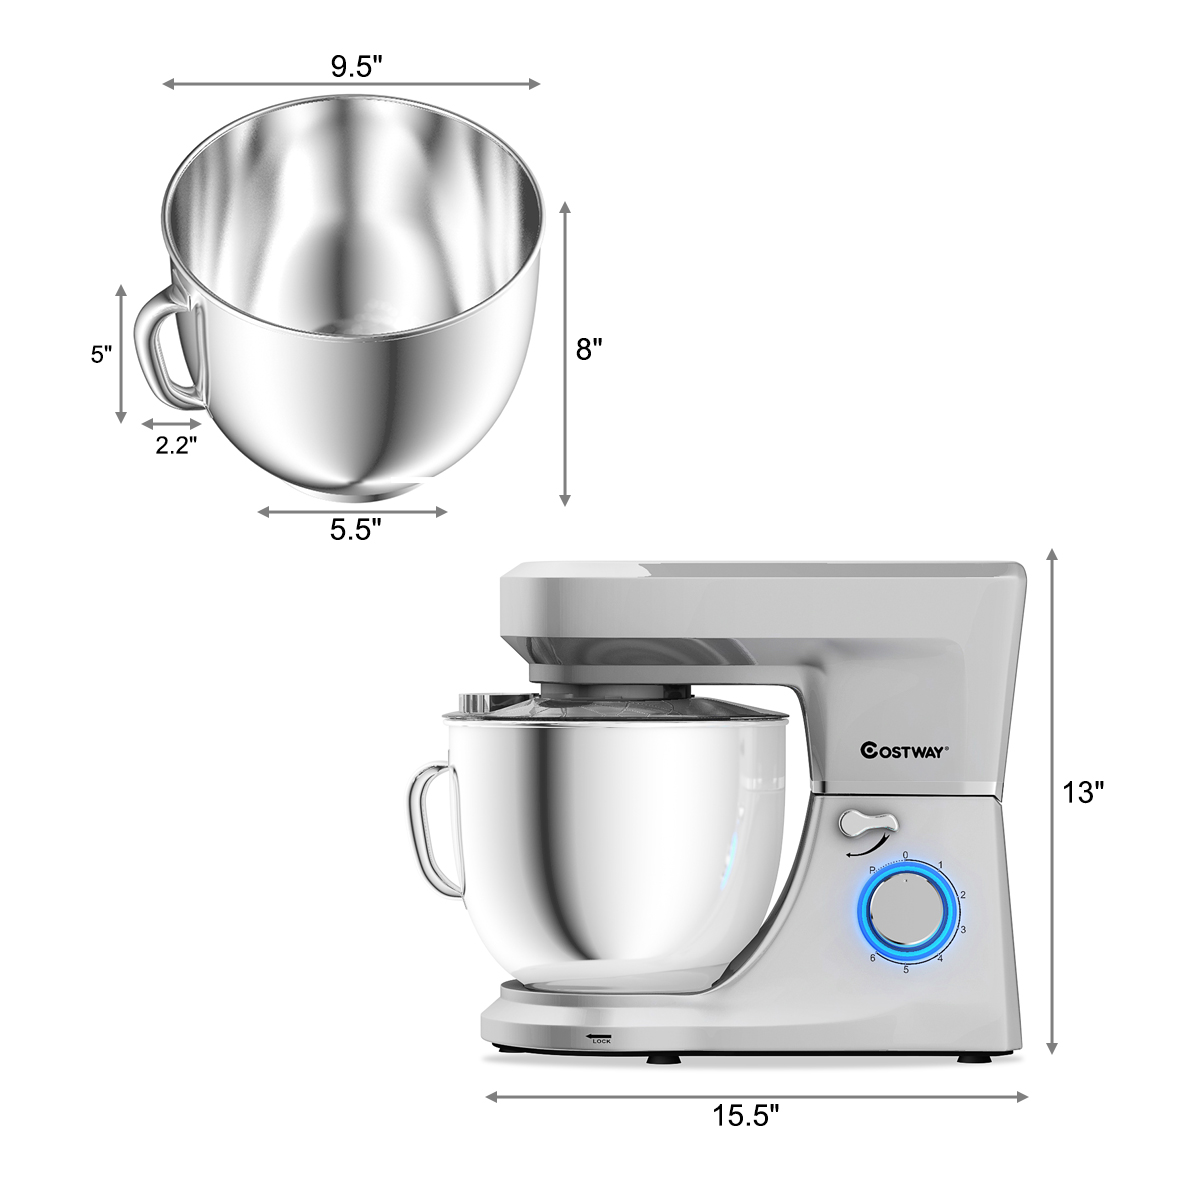 Costway Tilt-Head Stand Mixer 7.5 Qt 6 Speed 660W with Dough Hook, Whisk & Beater Silver - image 2 of 10